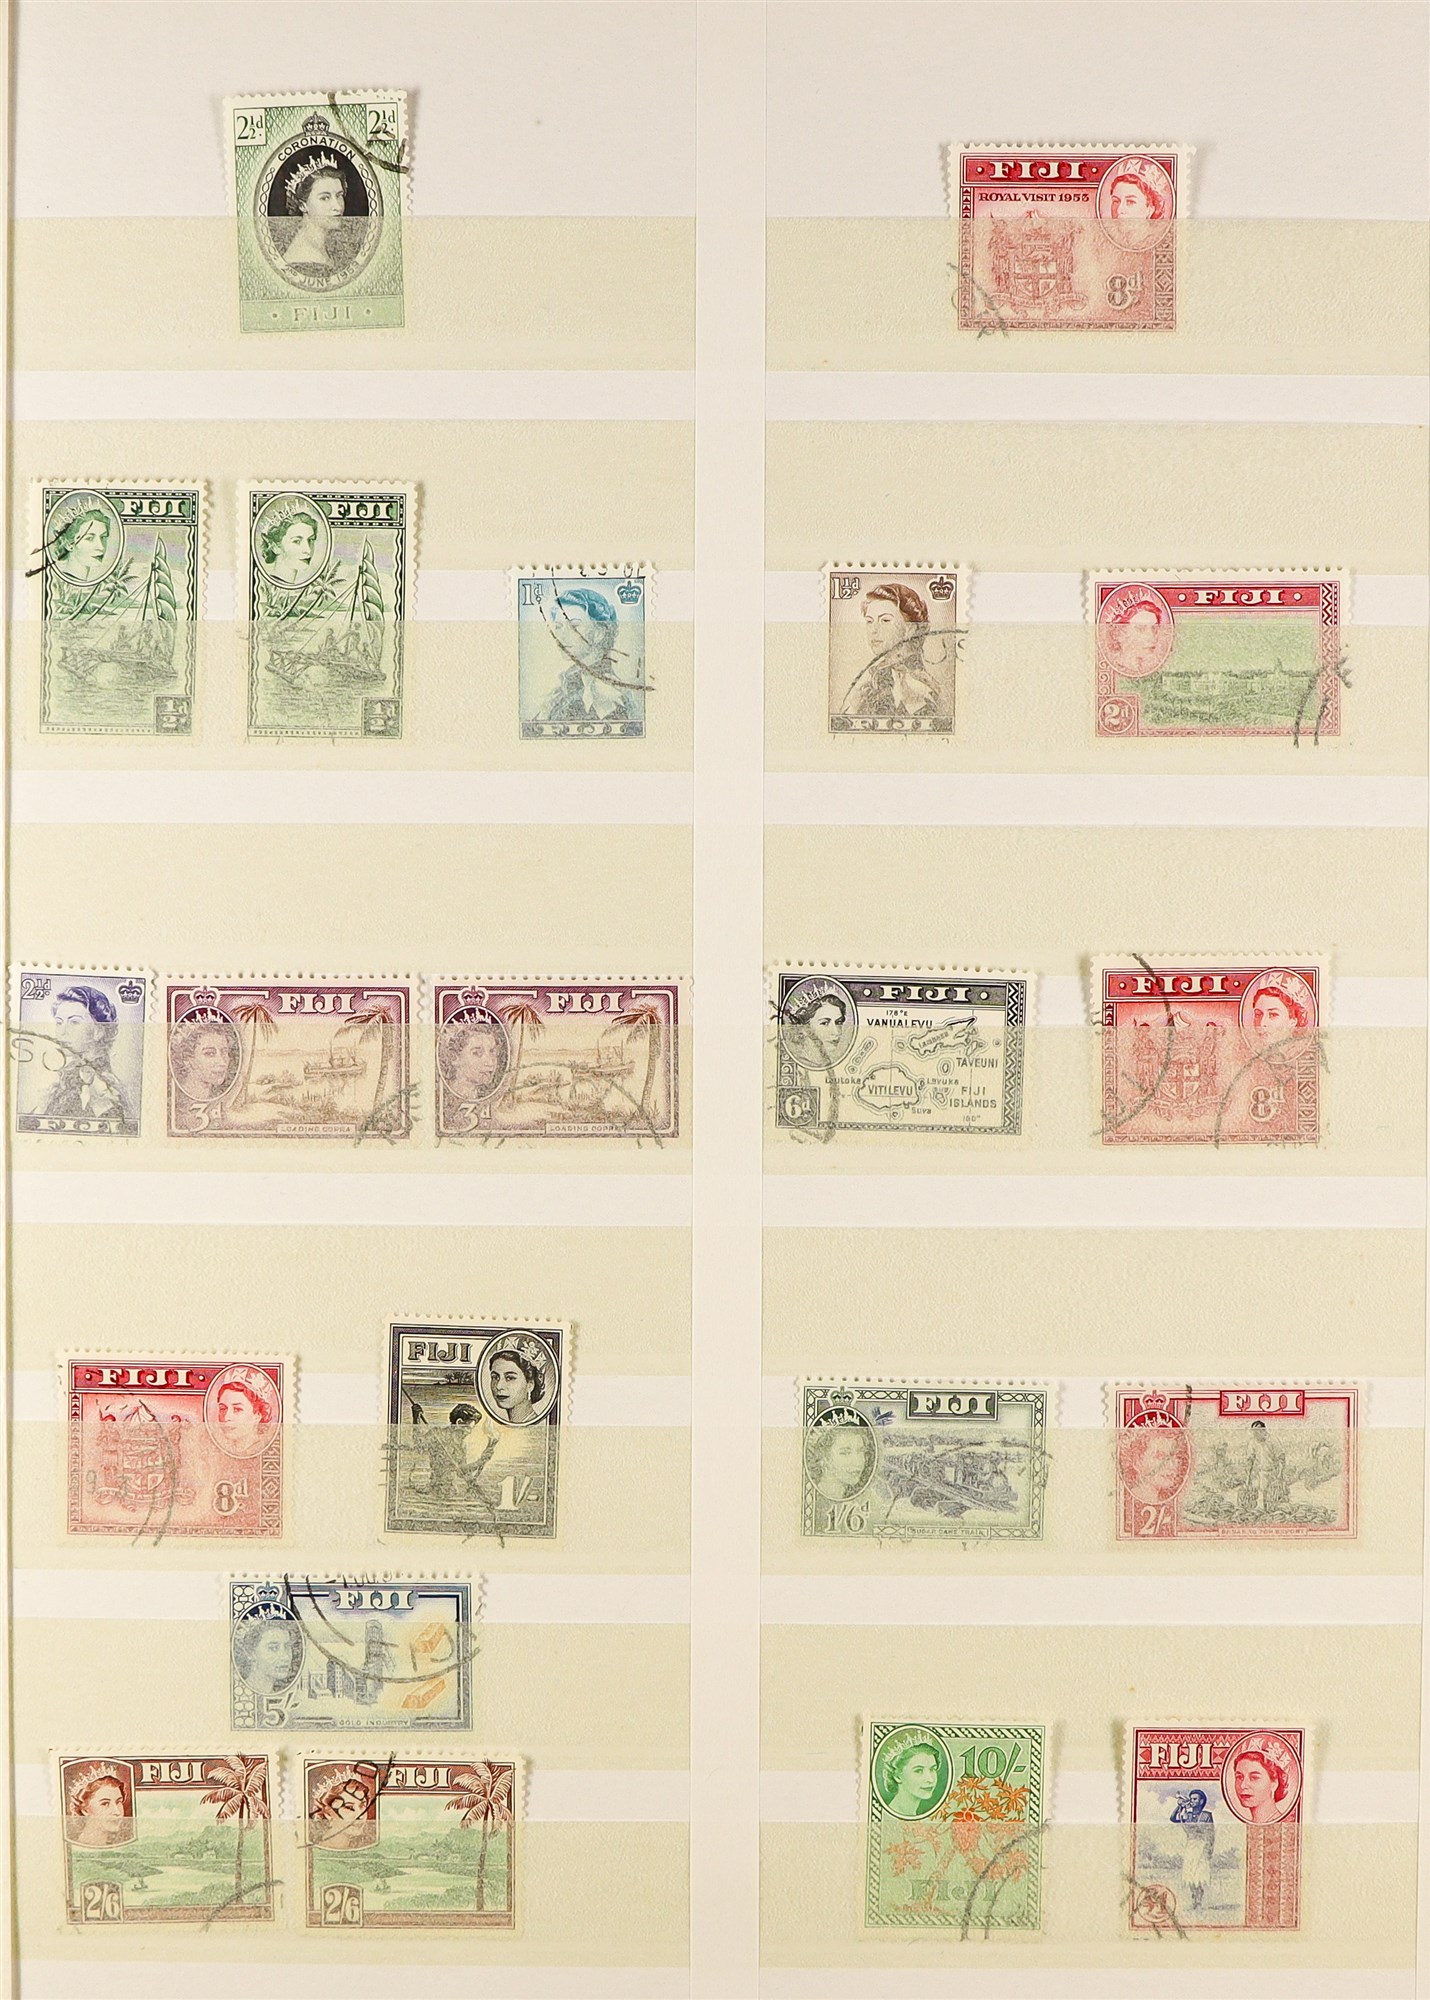 FIJI 1953 - 2000 COLLECTION of 800+ used stamps, near-complete for the period (SG 278 - 1096) with